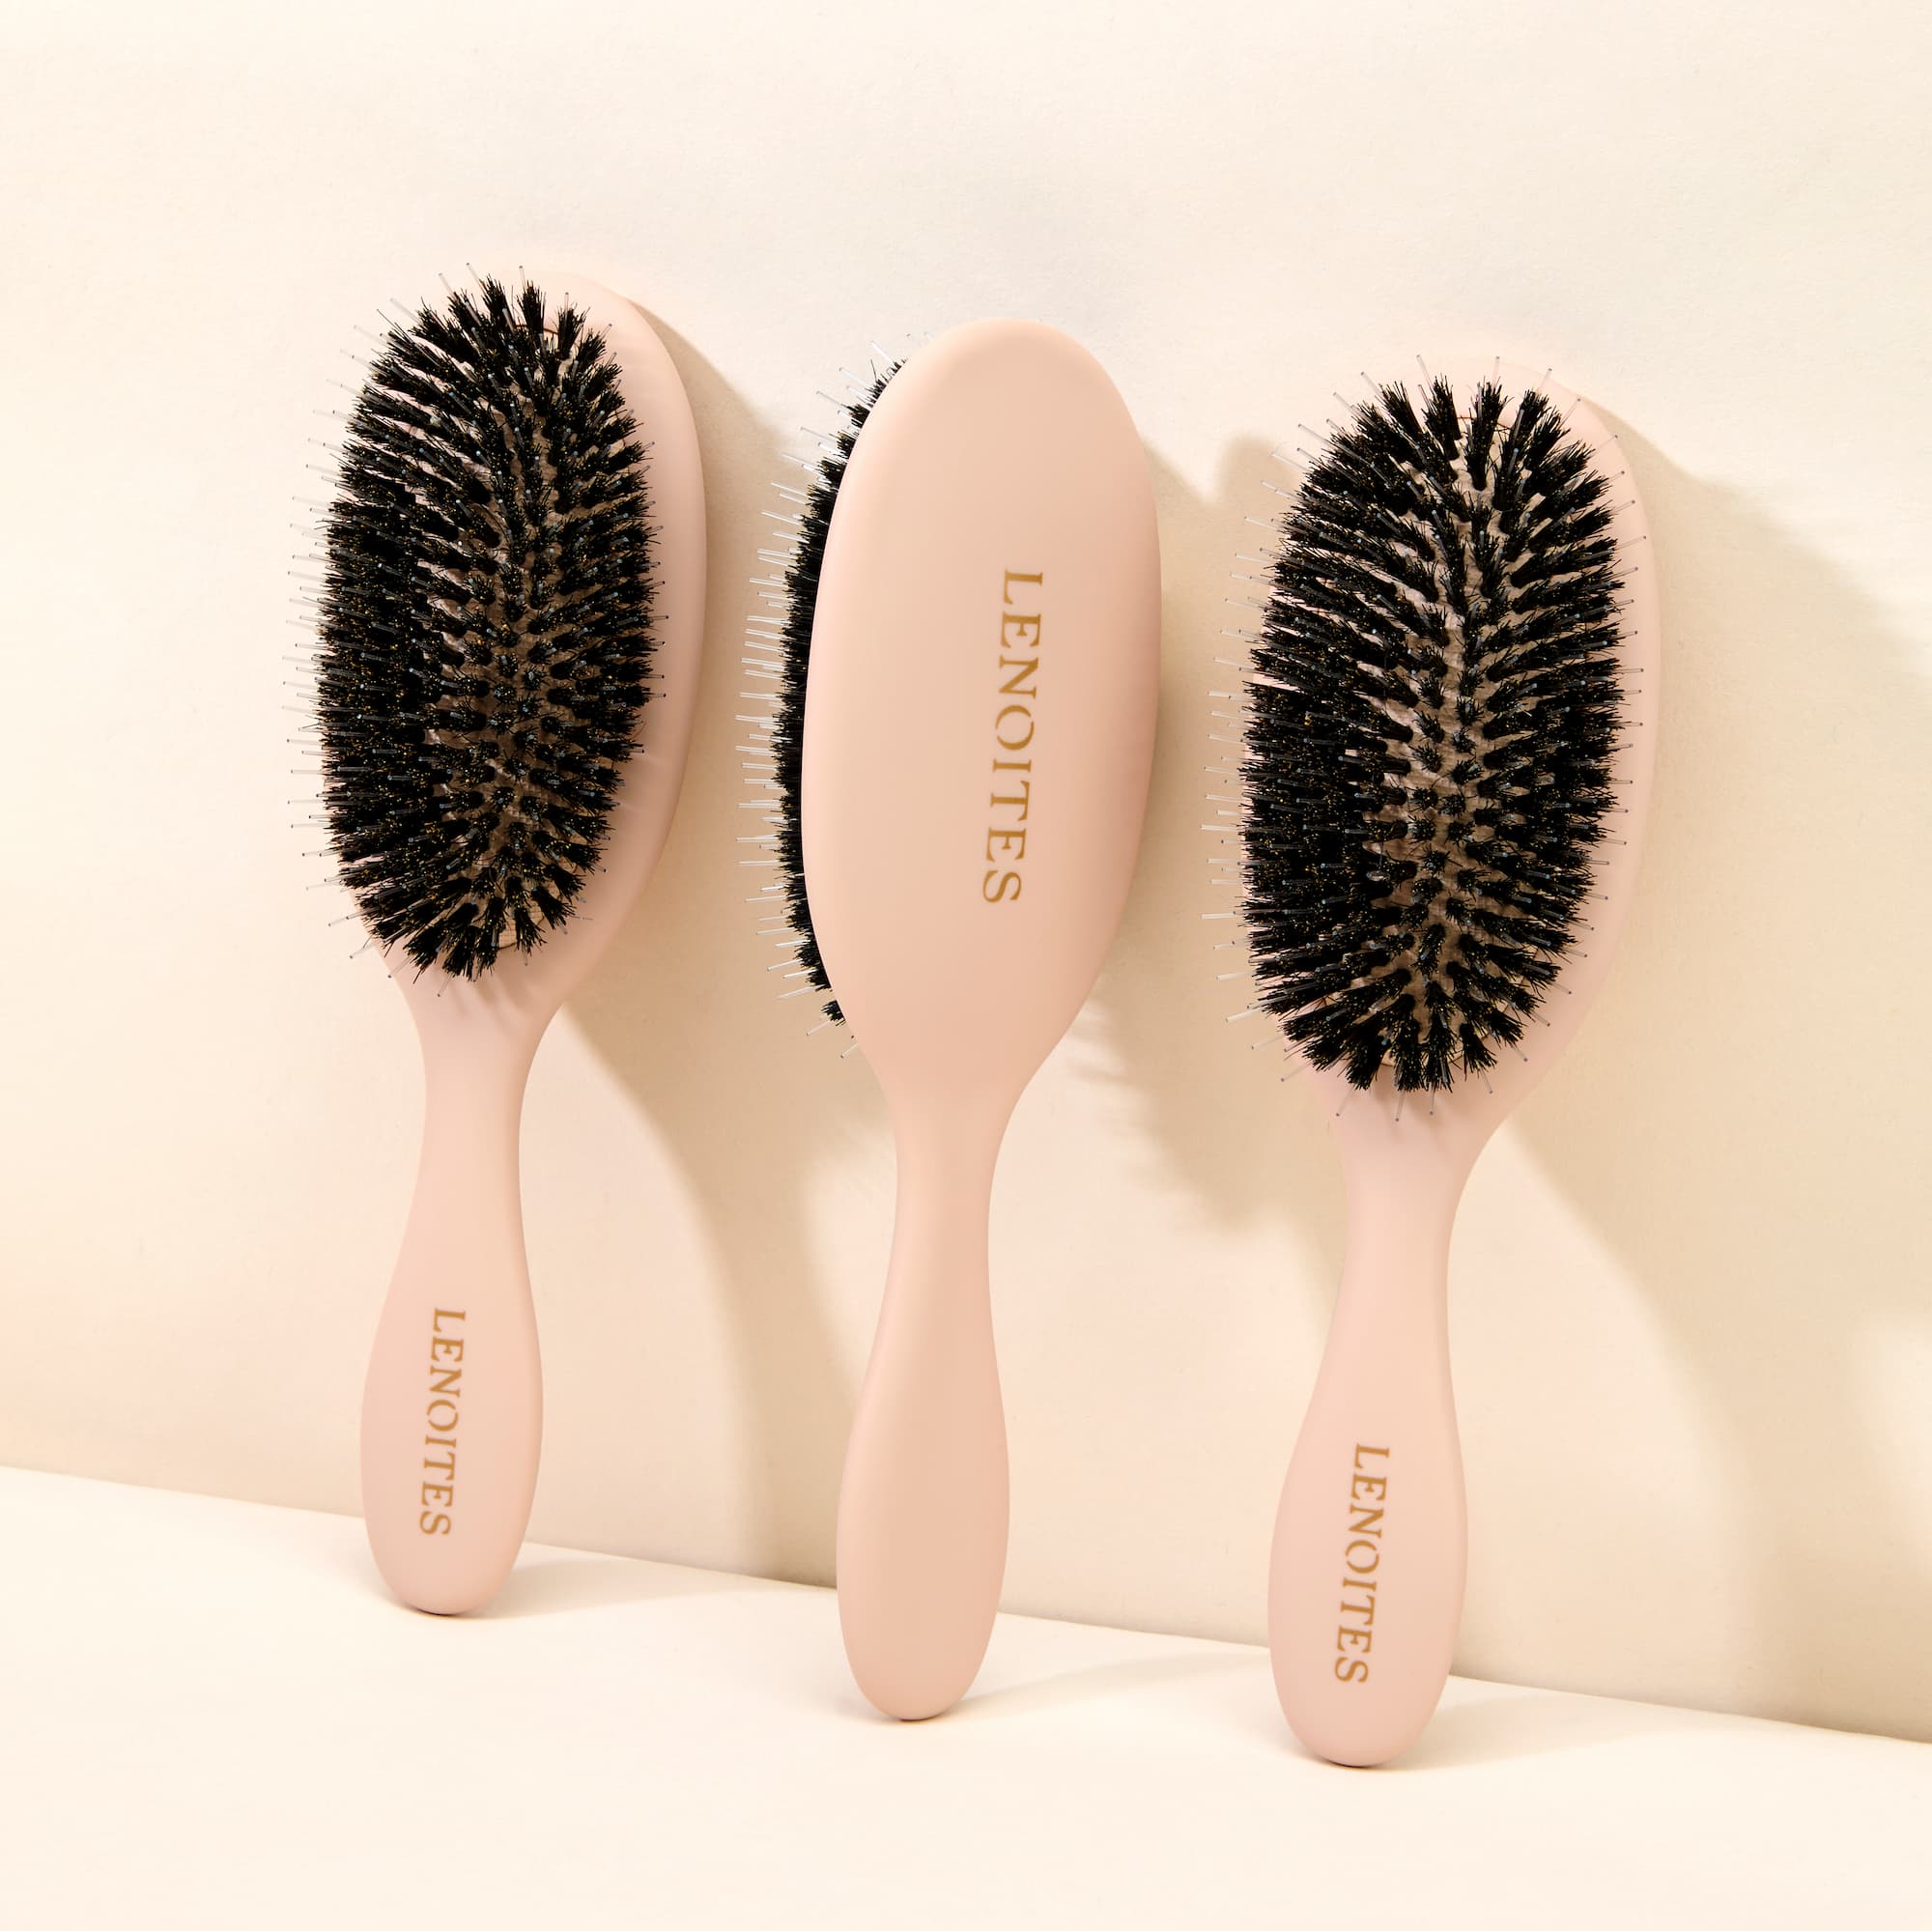 Hair Brush Wild Boar with pouch and cleaner tool, Blush